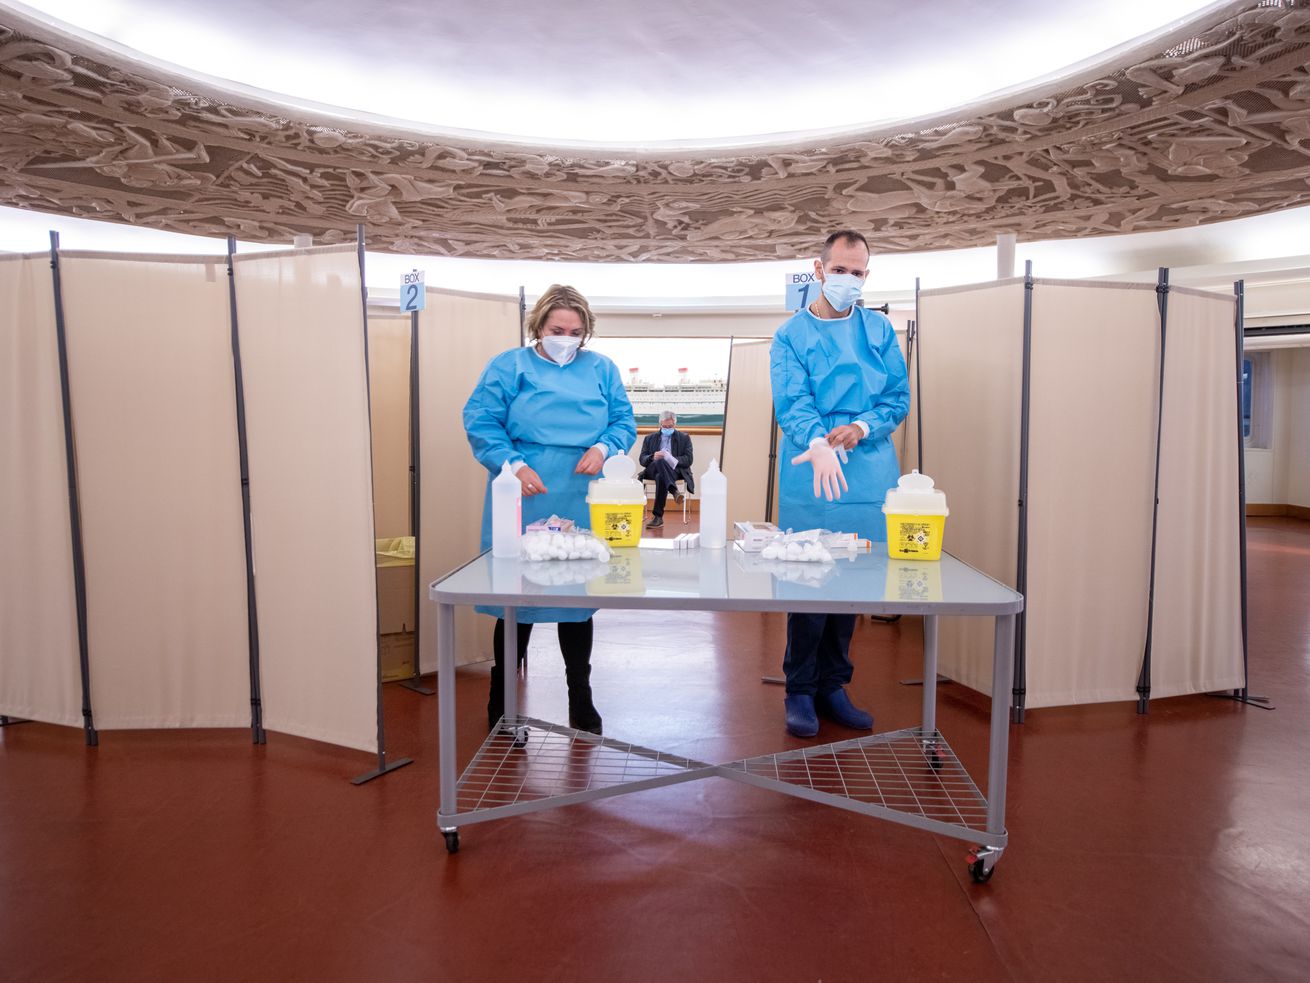 Two people stand at a table in protective gowns, gloves, and masks in preparation for distribution of a flu vaccine.